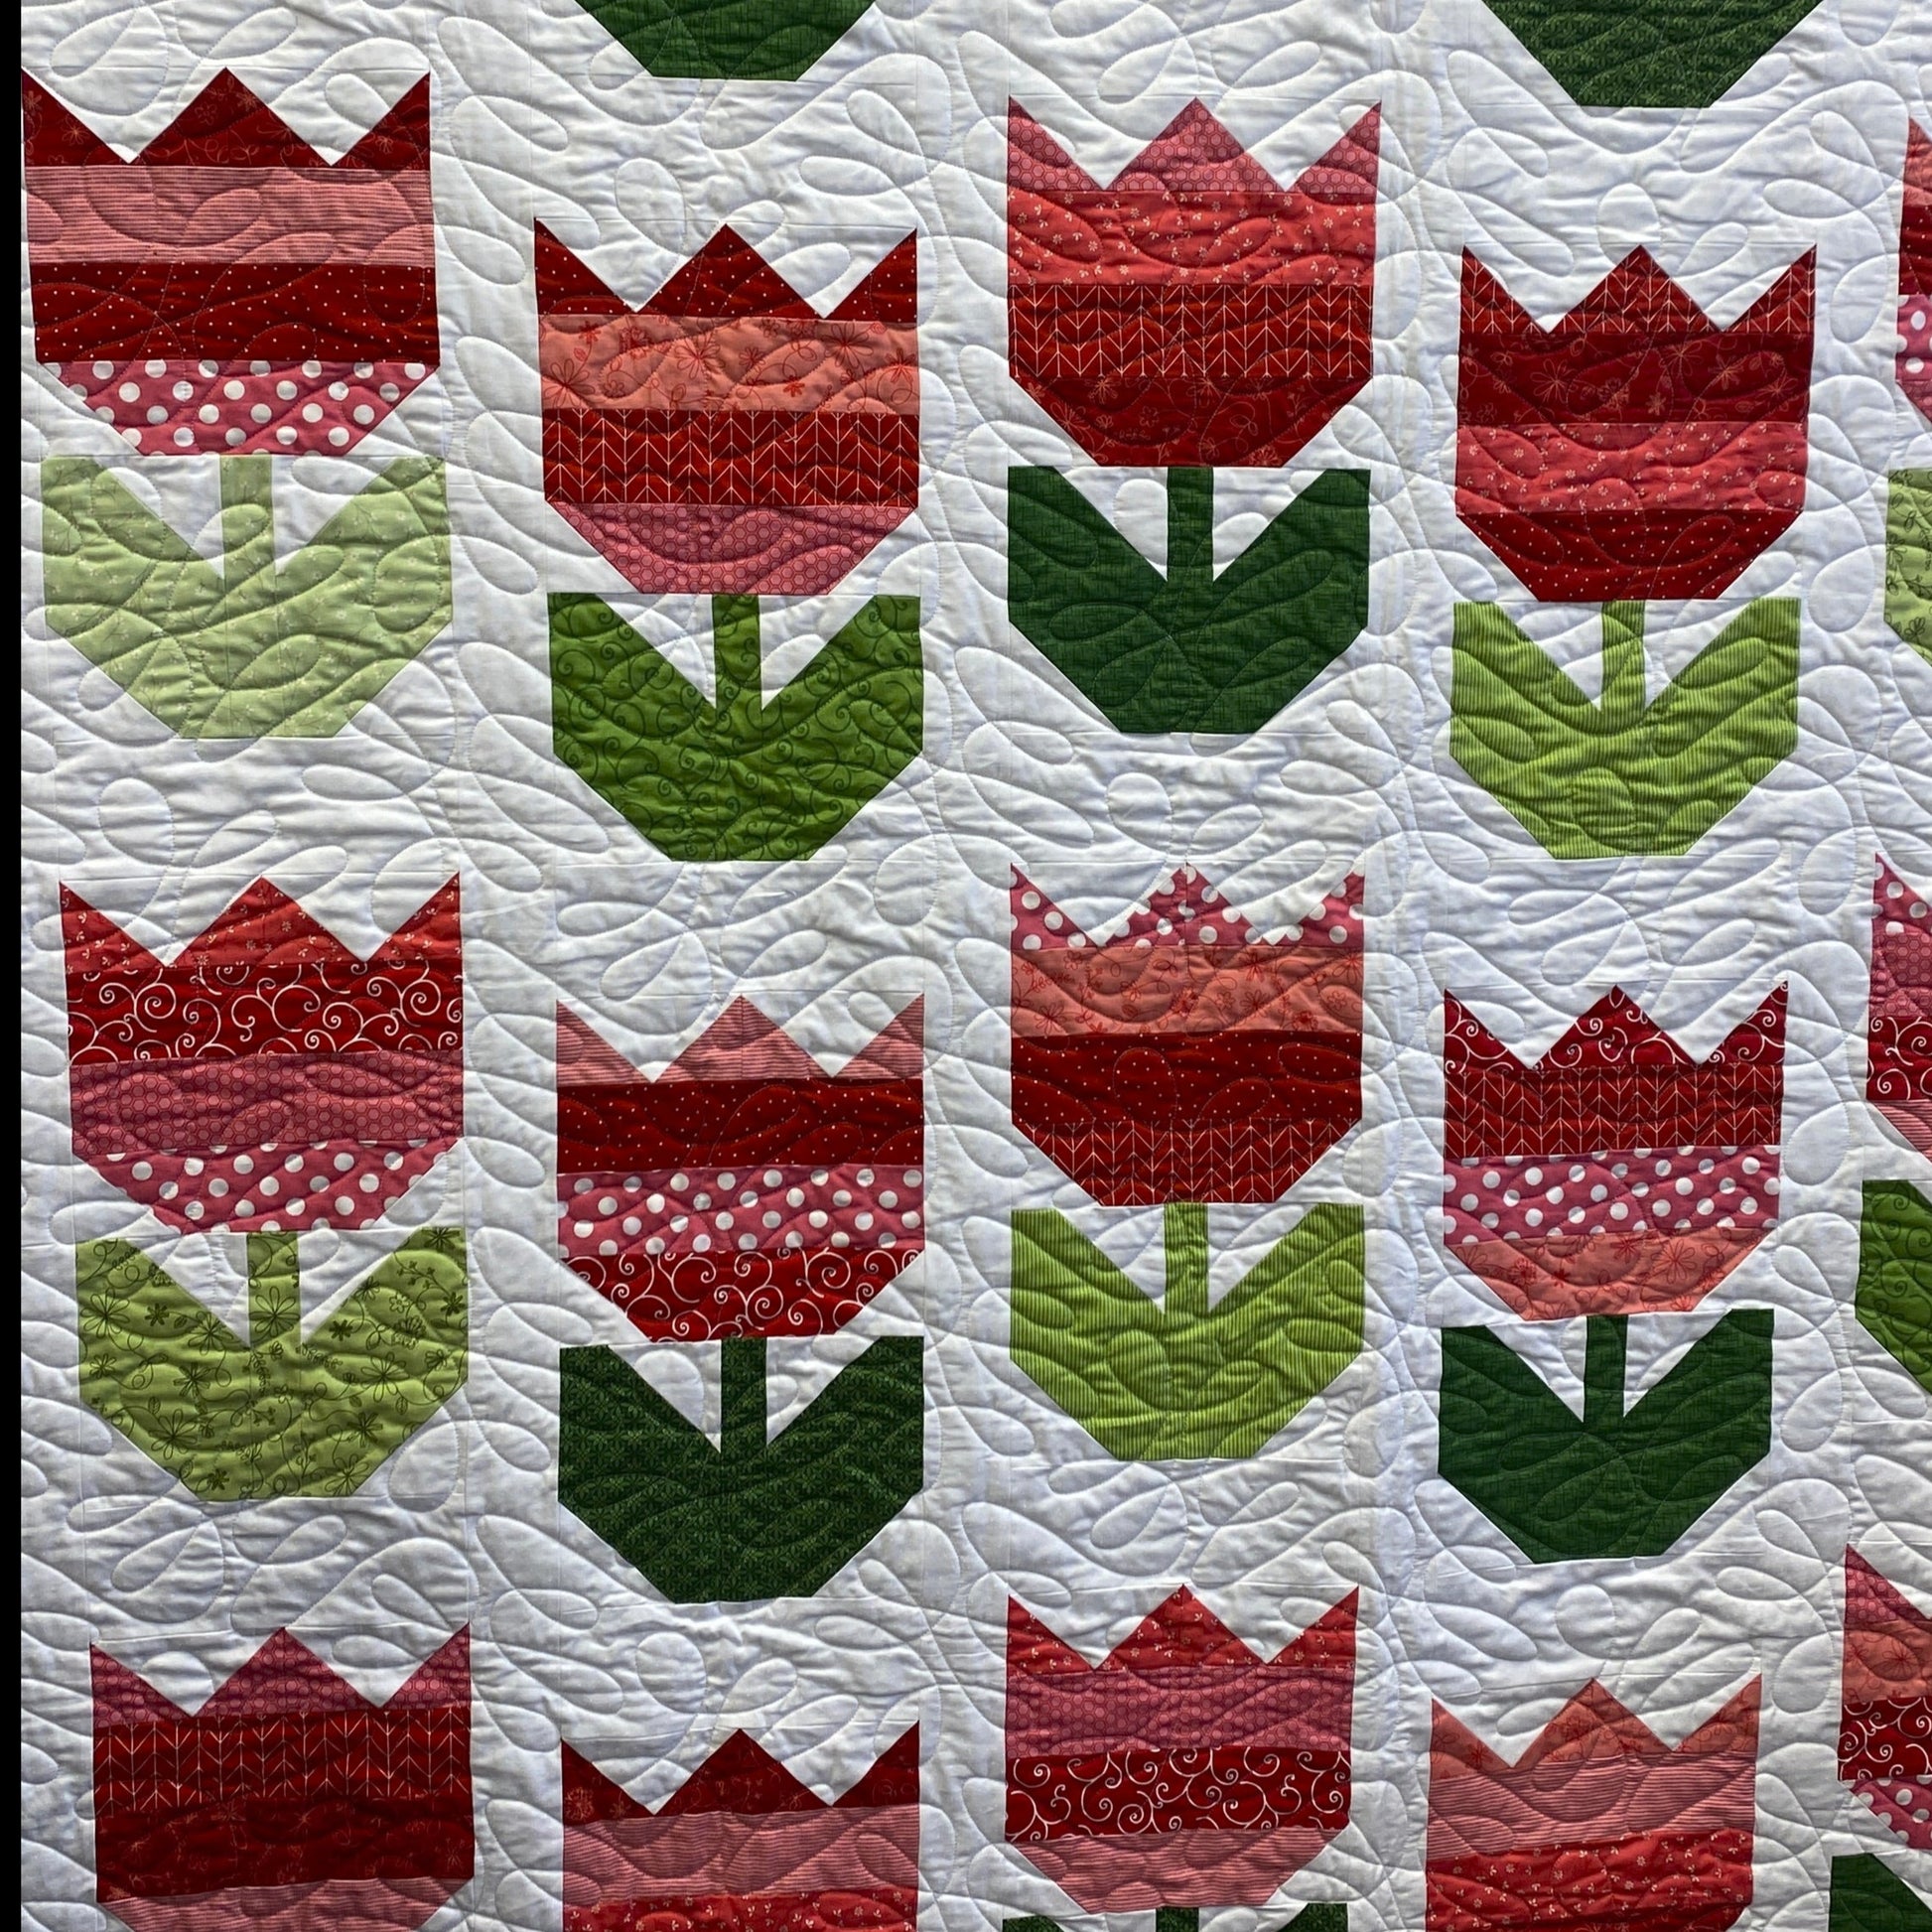 This quilt features rows of tulips with red strips used for the flower and various greens used for the stems. They are created in columns with stair-stepped rows on a white background with a light green binding.